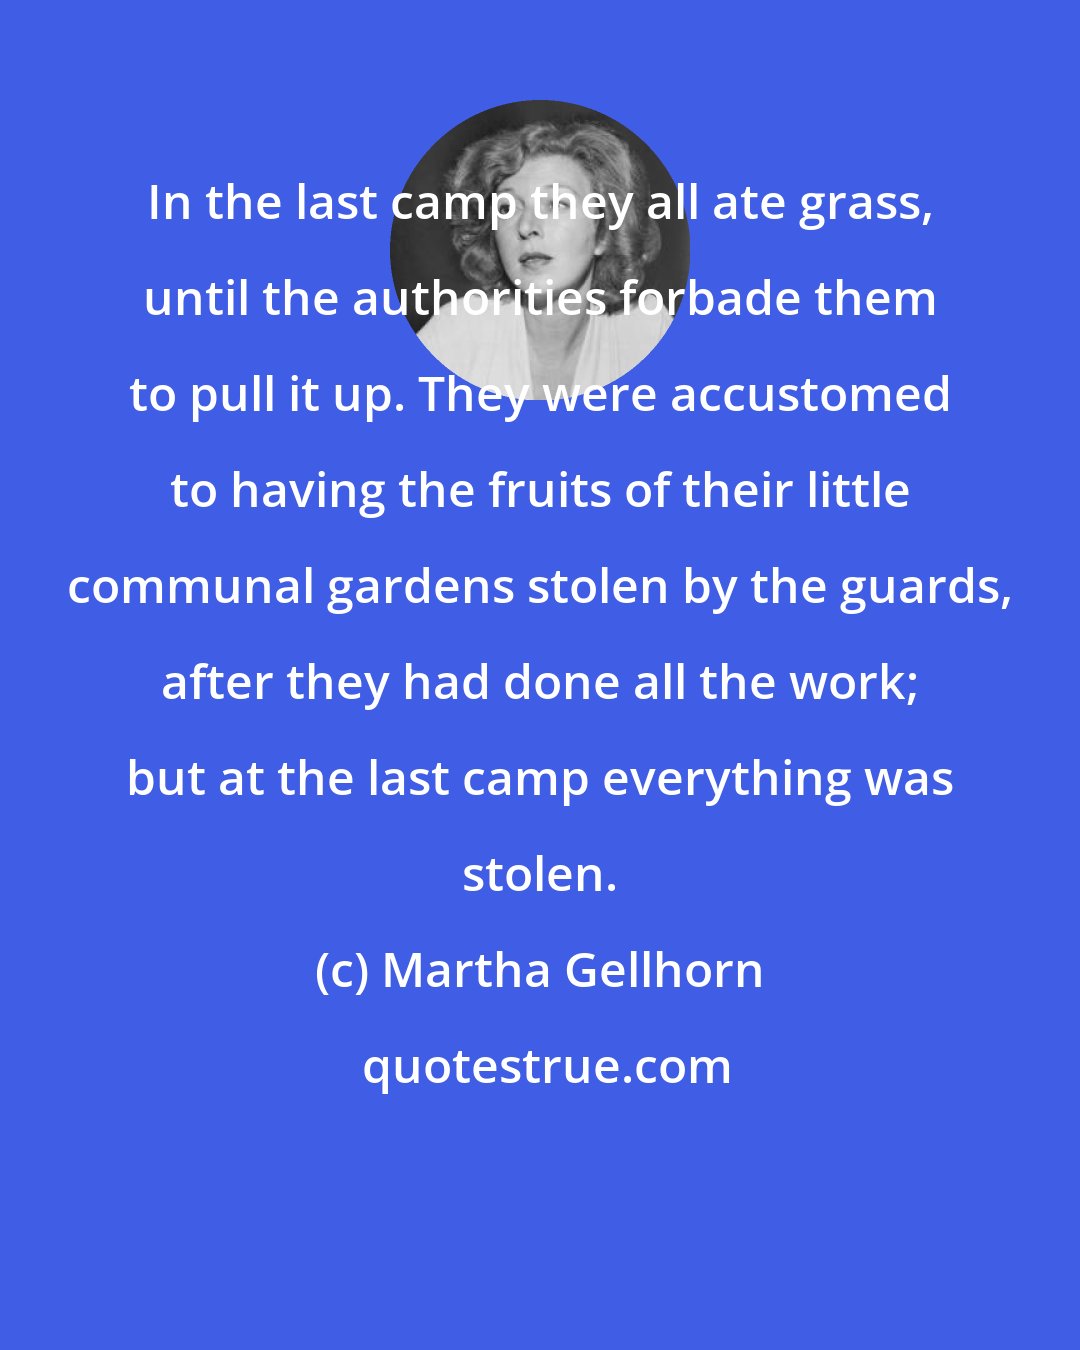 Martha Gellhorn: In the last camp they all ate grass, until the authorities forbade them to pull it up. They were accustomed to having the fruits of their little communal gardens stolen by the guards, after they had done all the work; but at the last camp everything was stolen.